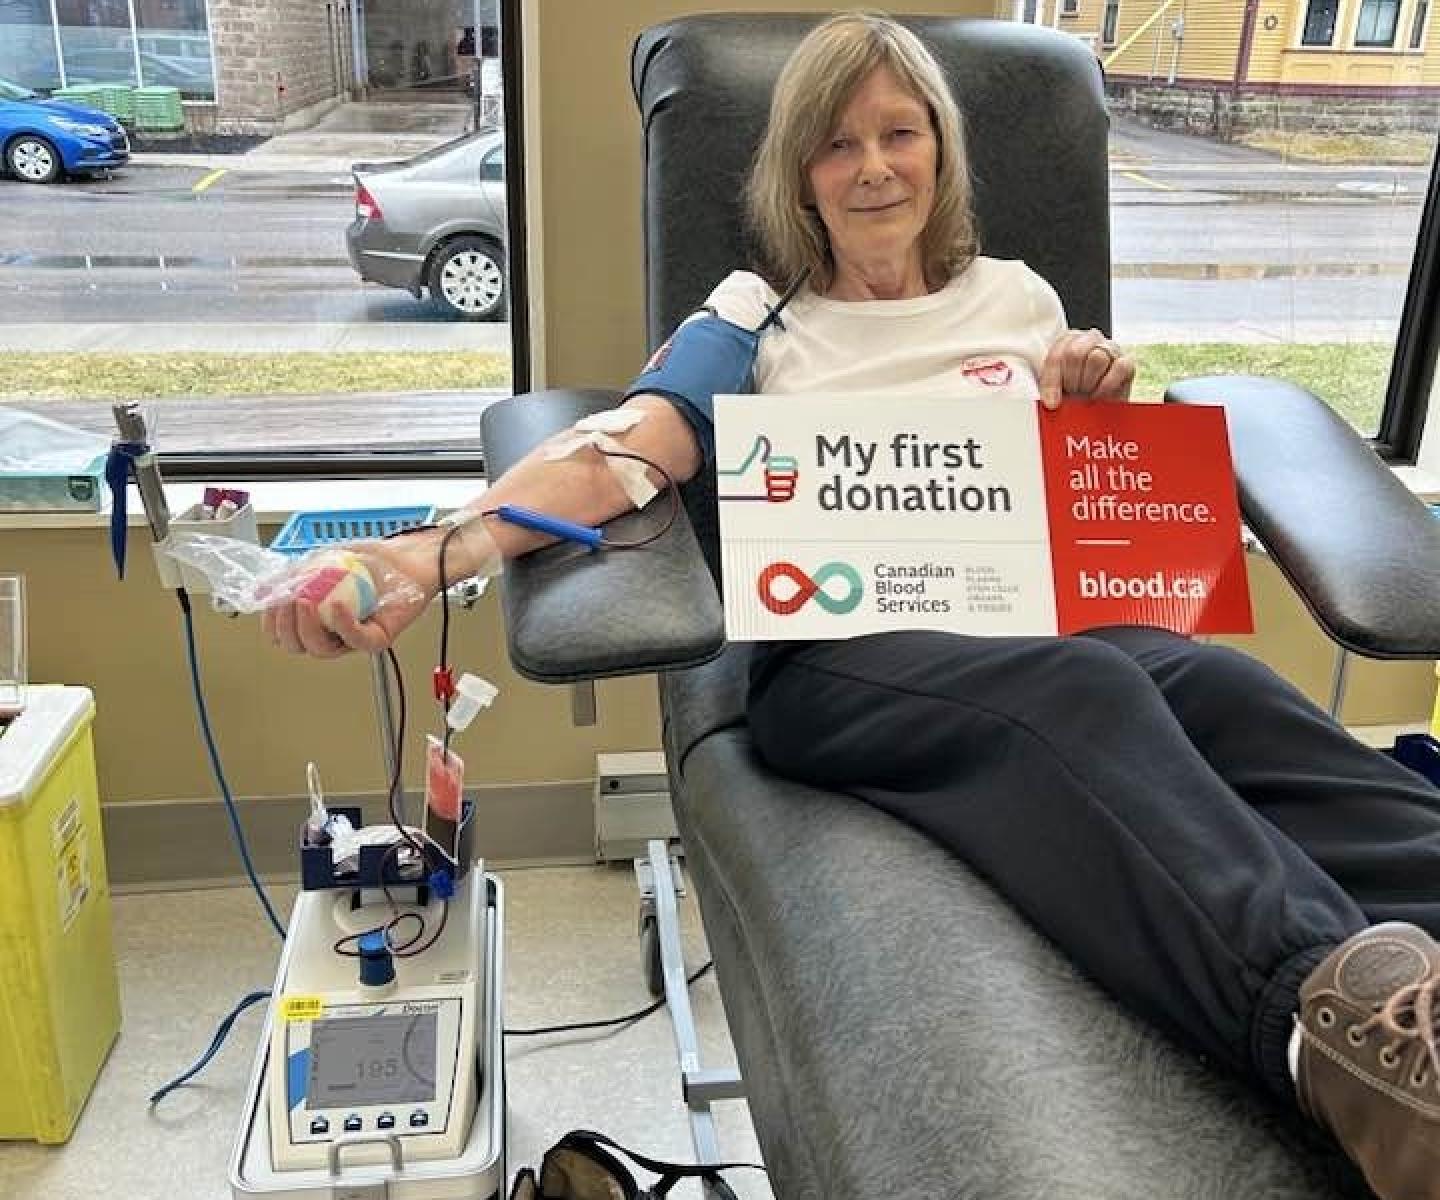 Blood donor in chair holding sign that says my first donation